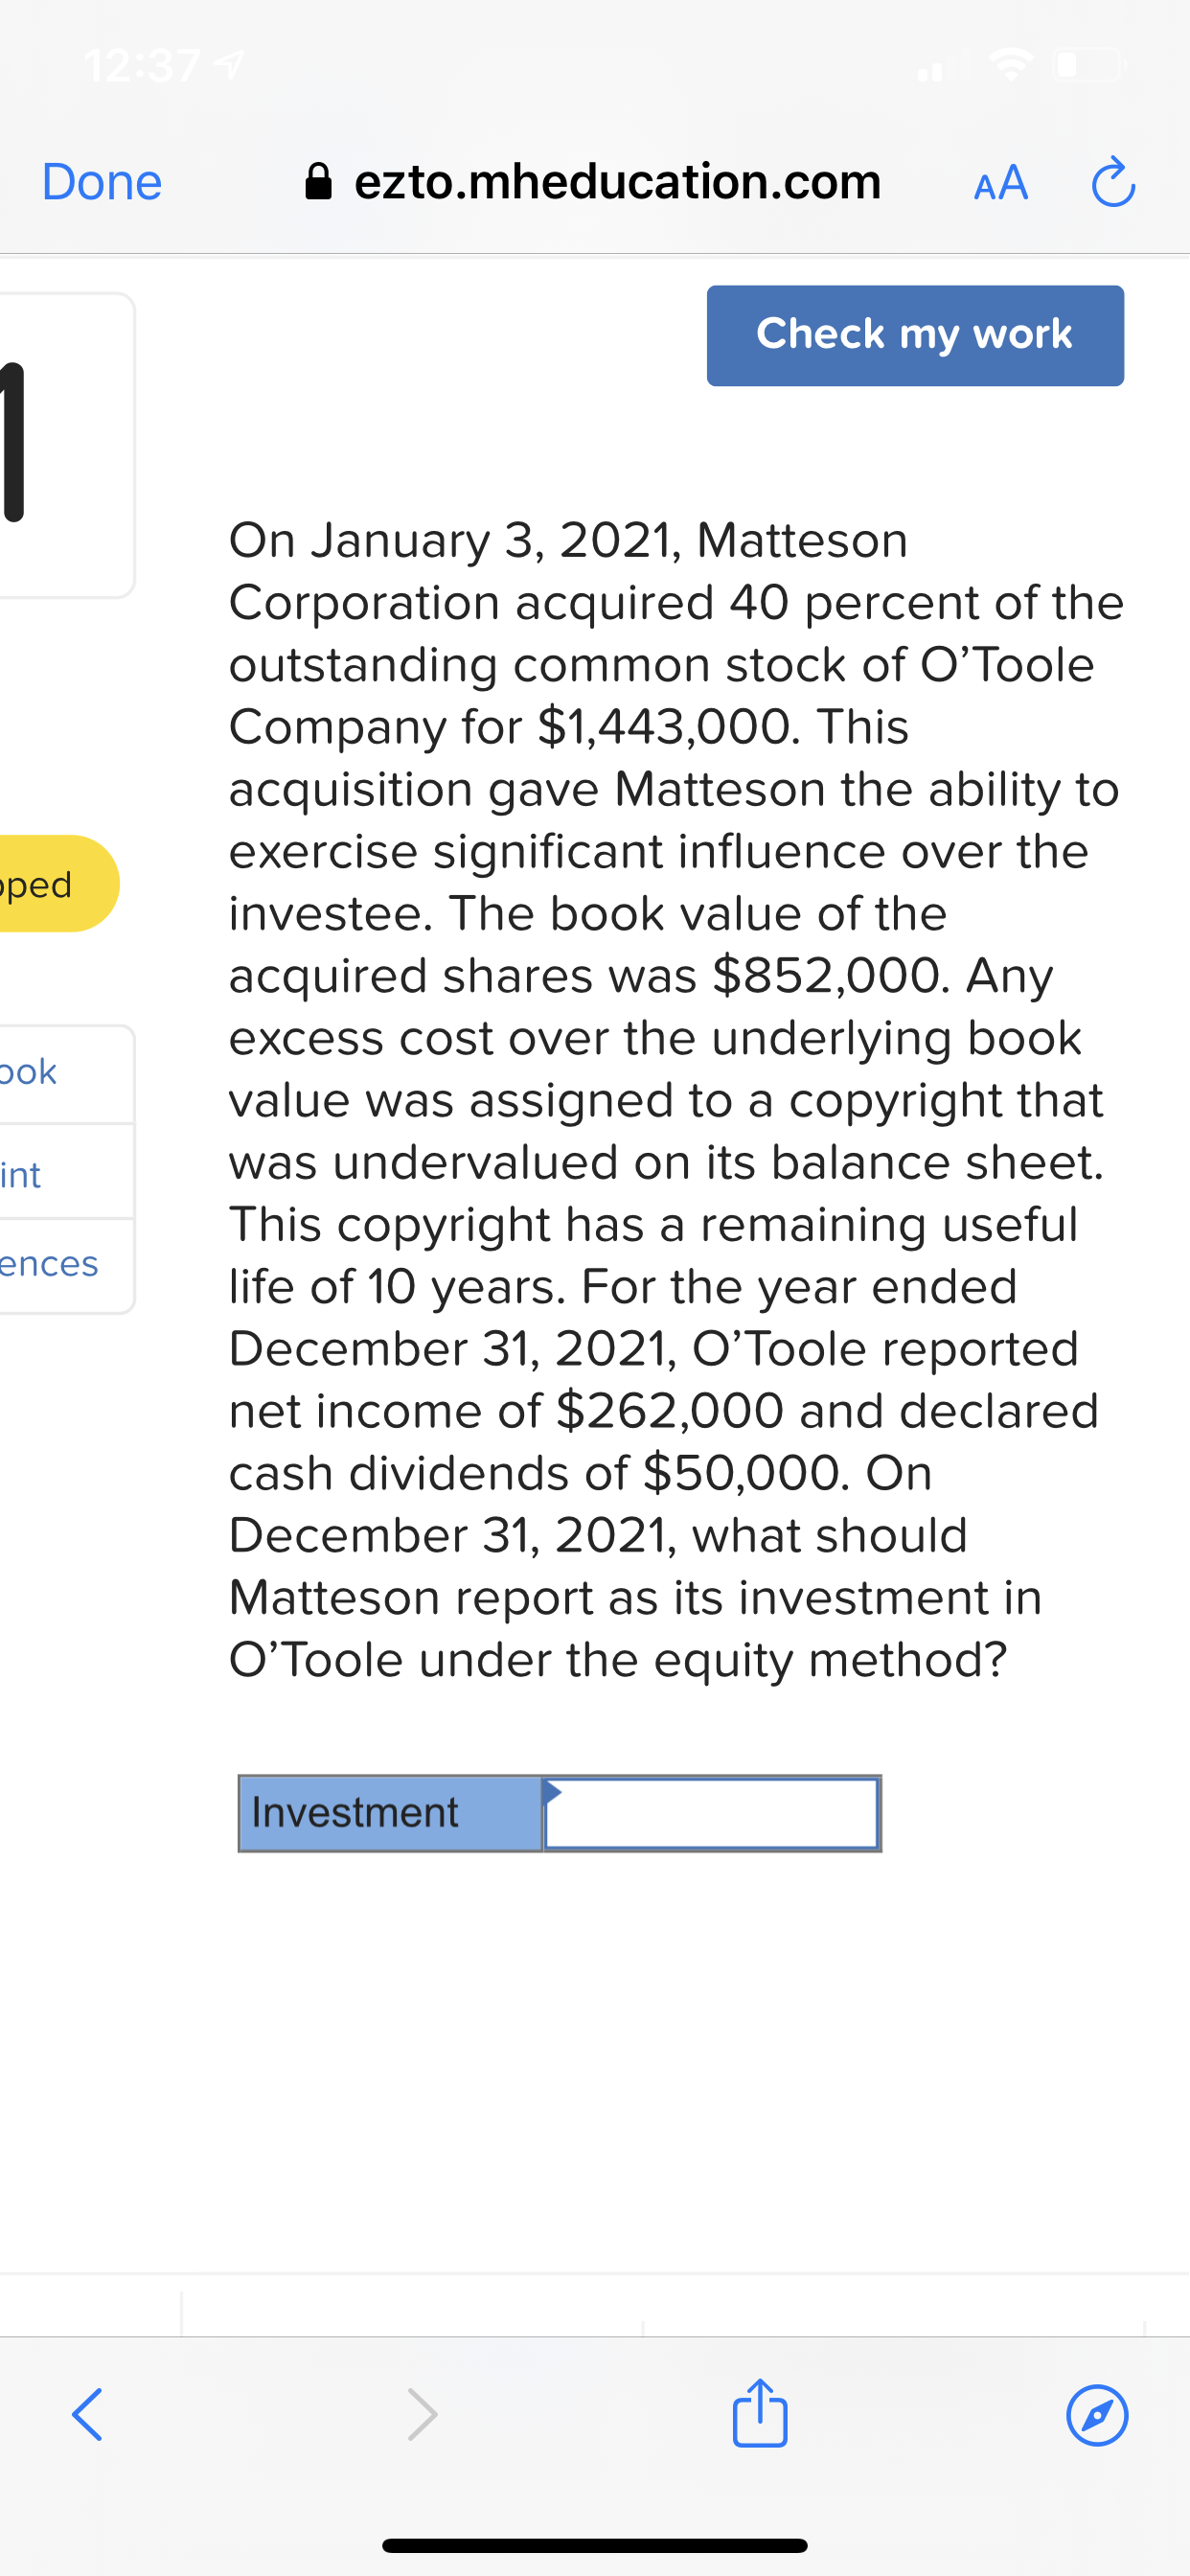 On January 3, 2021, Matteson
Corporation acquired 40 percent of the
outstanding common stock of O'Toole
Company for $1,443,000. This
acquisition gave Matteson the ability to
exercise significant influence over the
investee. The book value of the
acquired shares was $852,000. Any
excess cost over the underlying book
value was assigned to a copyright that
was undervalued on its balance sheet.
This copyright has a remaining useful
life of 10 years. For the year ended
December 31, 2021, O’Toole reported
net income of $262,000 and declared
cash dividends of $50,000. On
December 31, 2021, what should
Matteson report as its investment in
O’Toole under the equity method?
Investment
